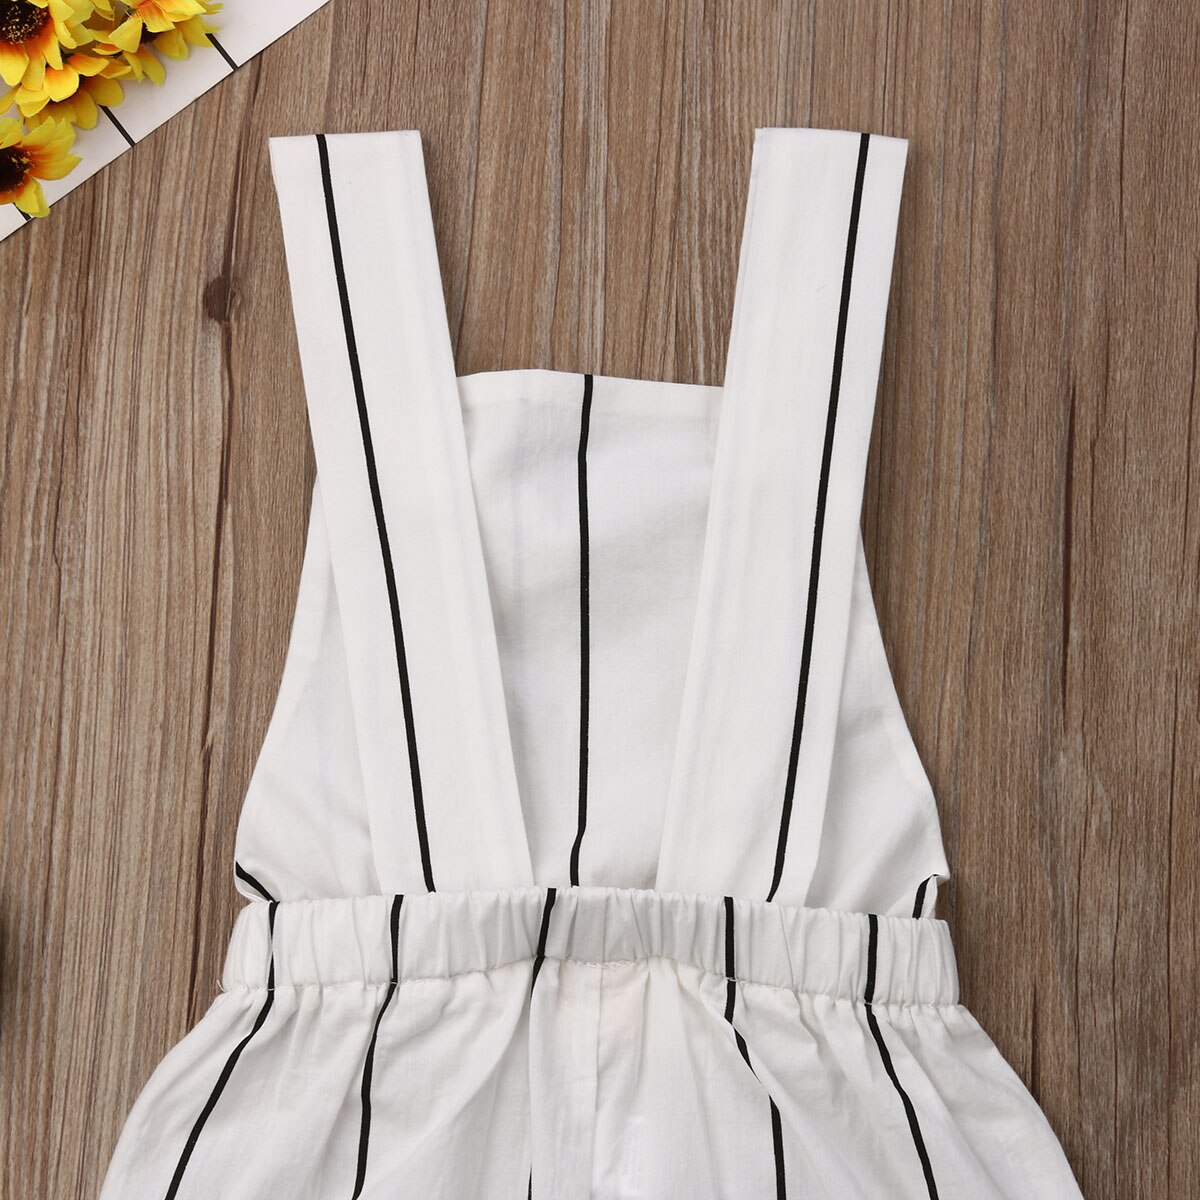 Kids Kleding Peuter Baby Meisjes Kleding Romper Mouwloos Streep Jumpsuit Overall Outfit